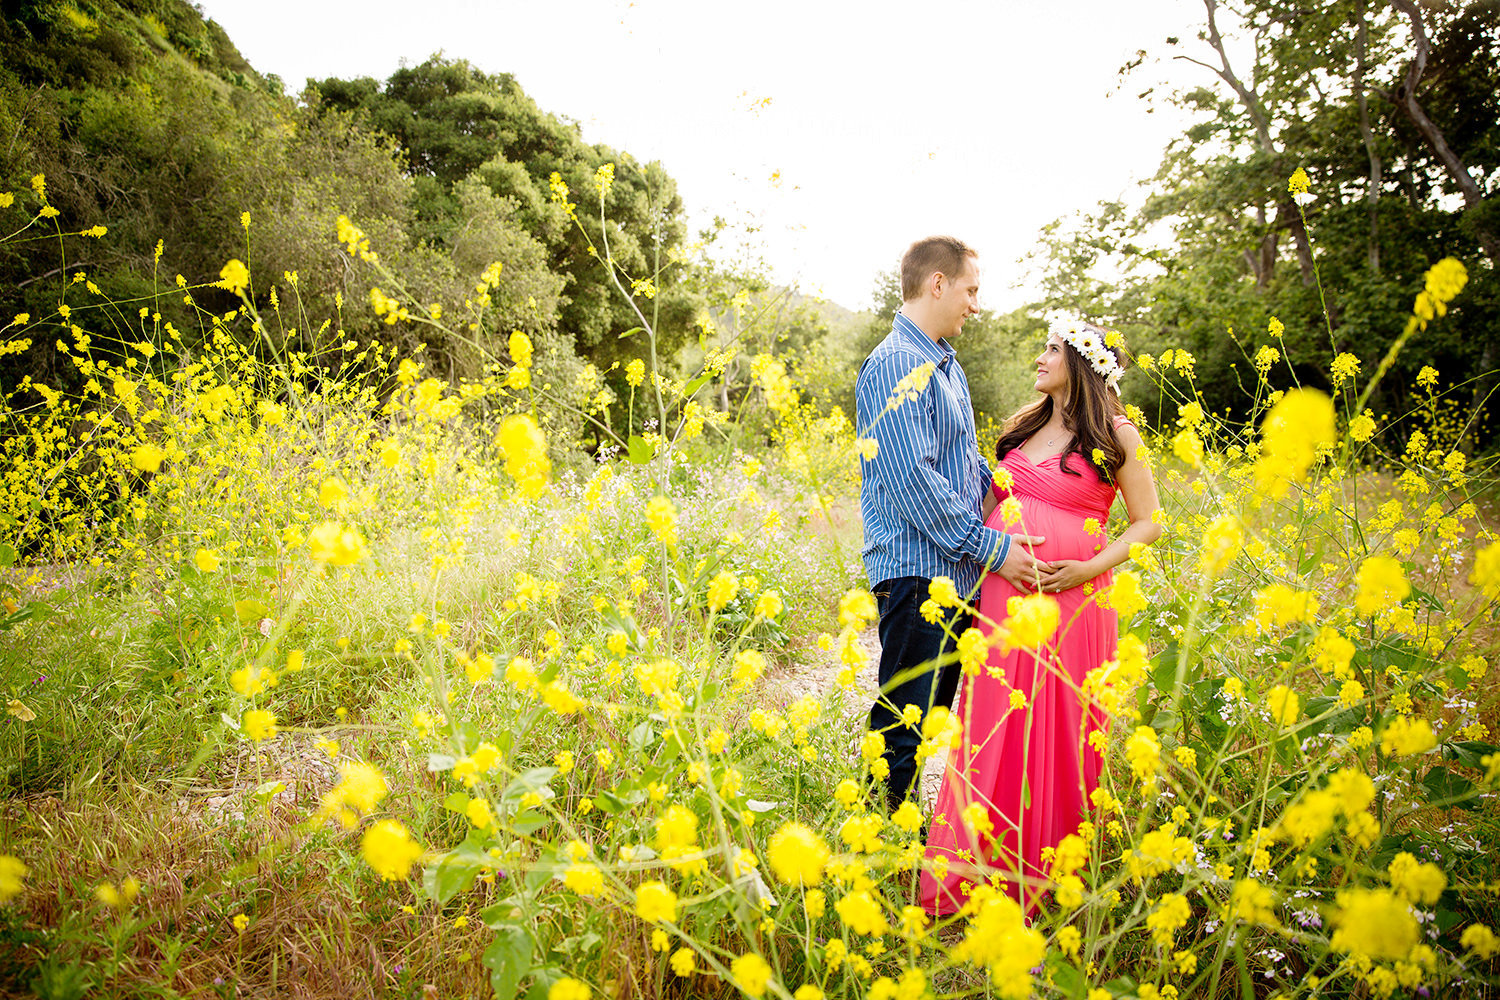 Maternity Session in a flower field in San Diego.